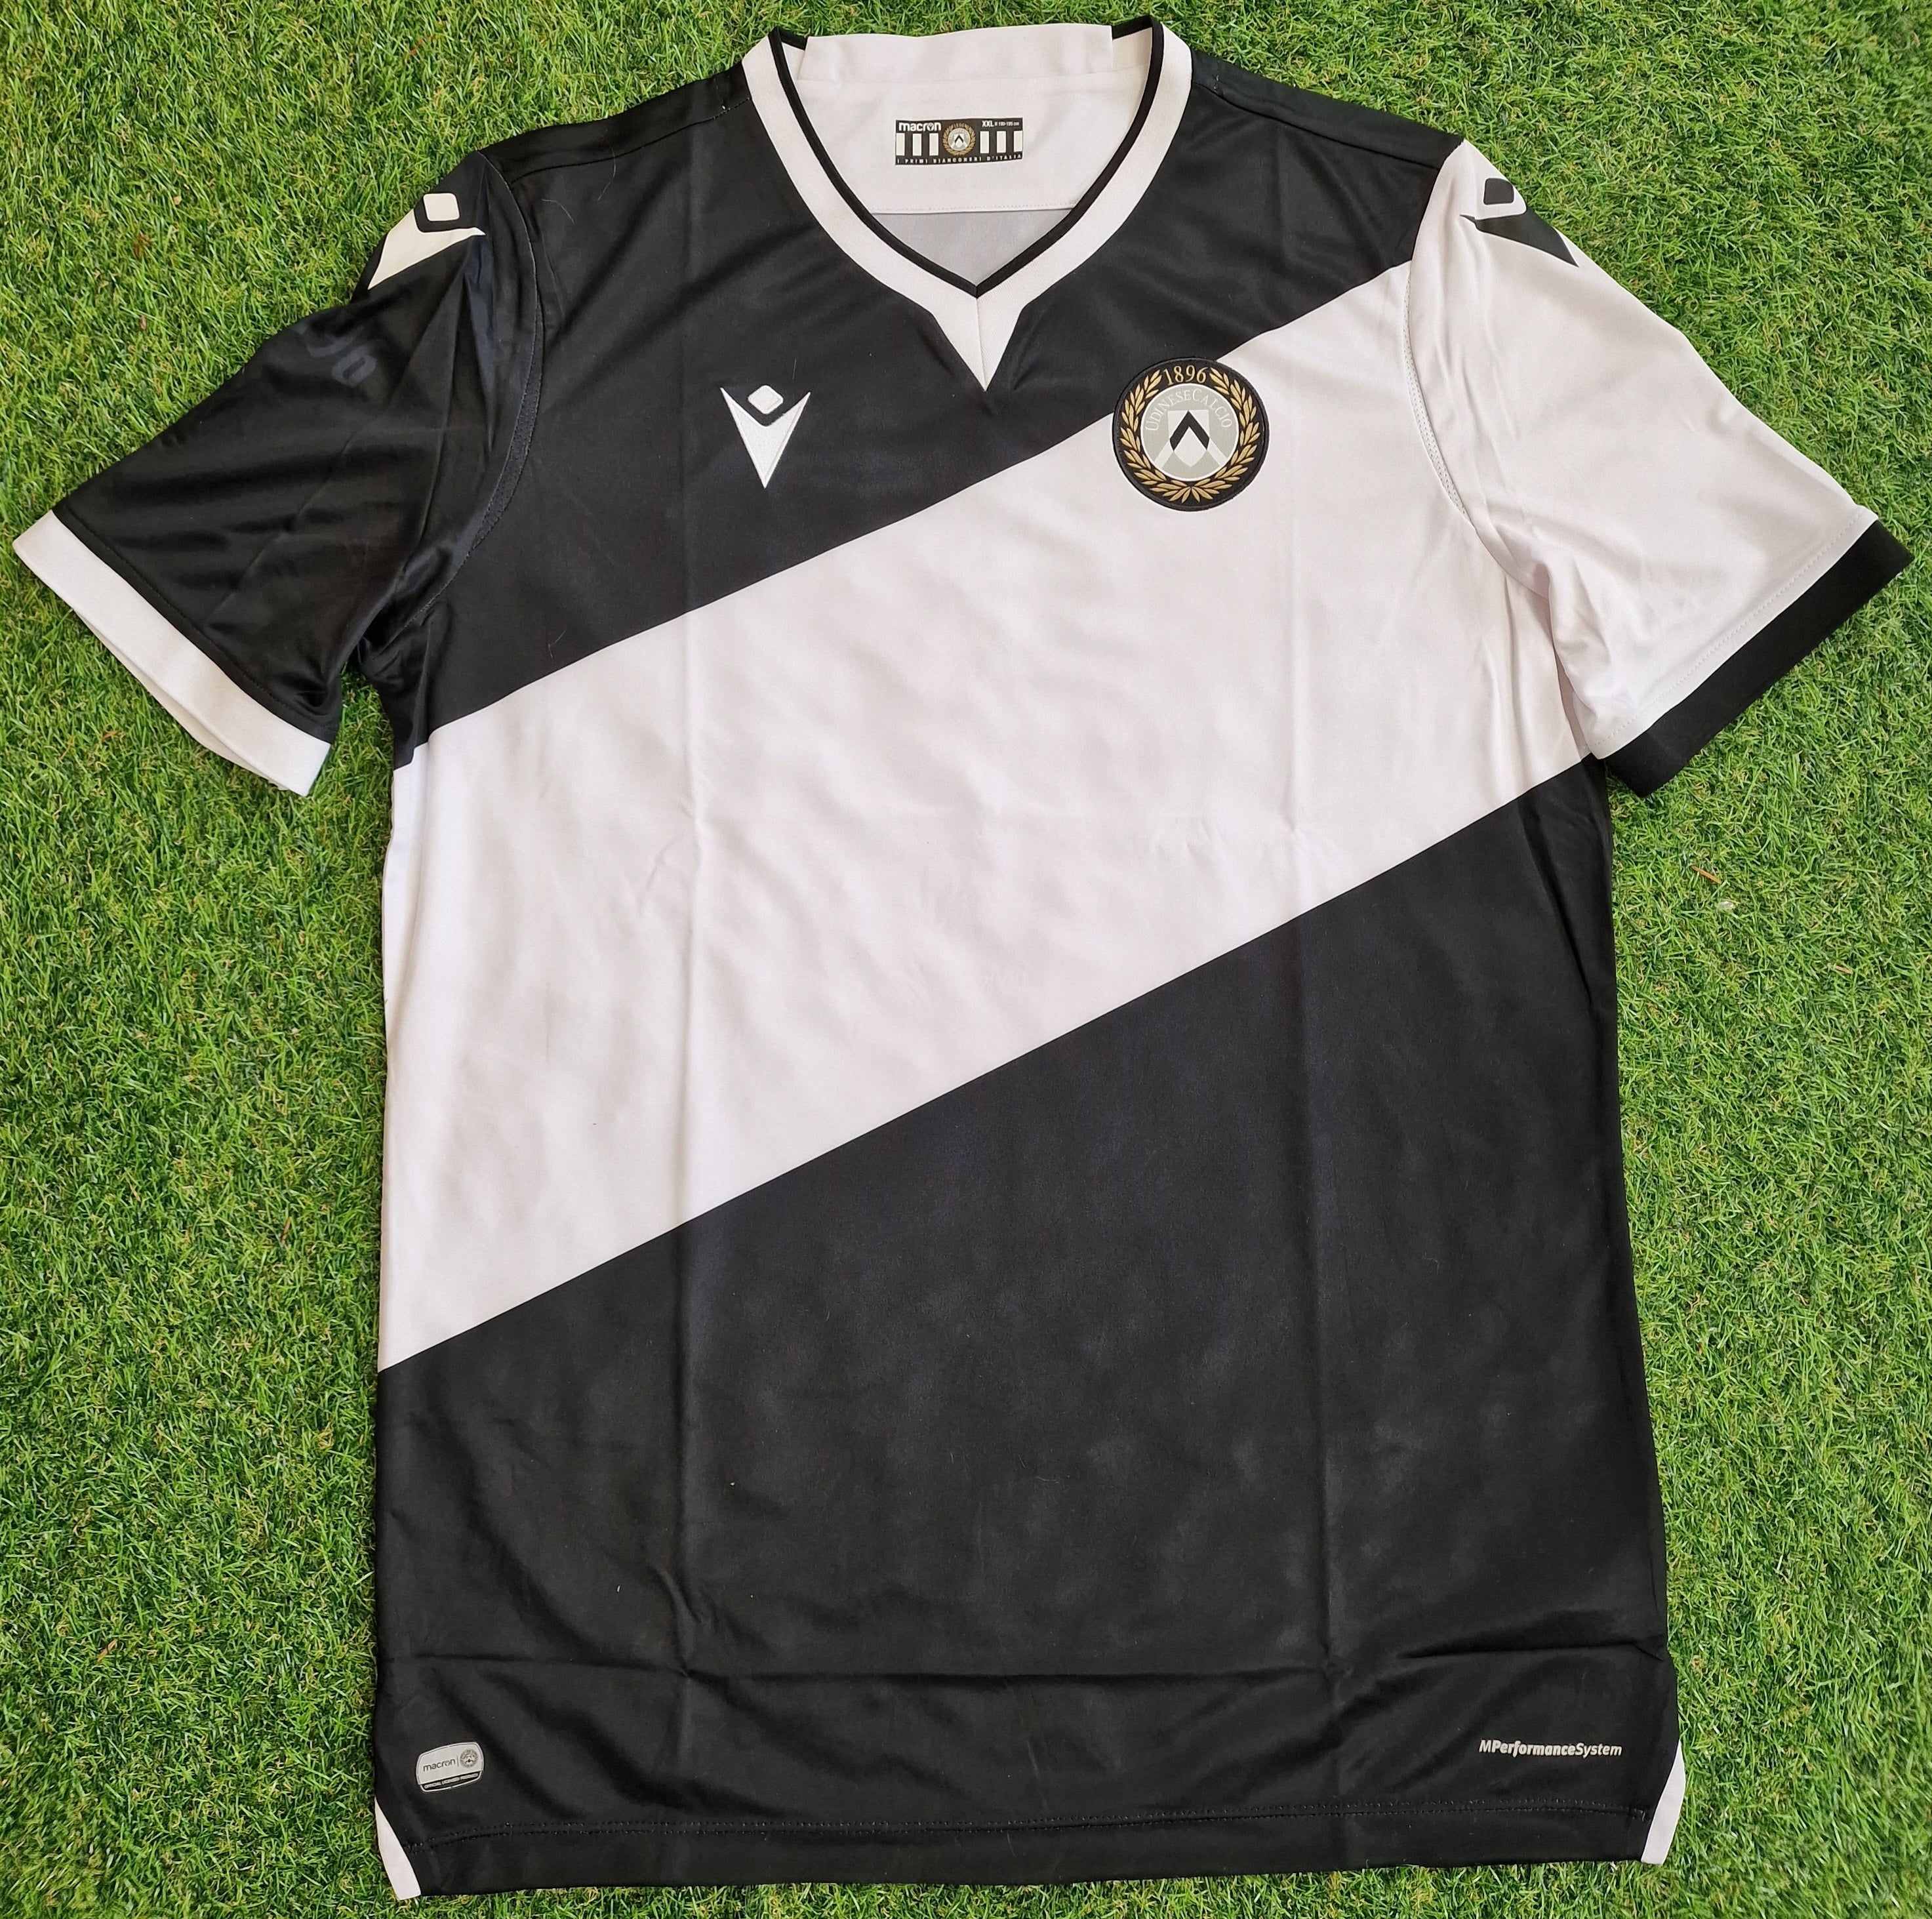 Udinese Home Shirt 2020/21 - Size 2XL